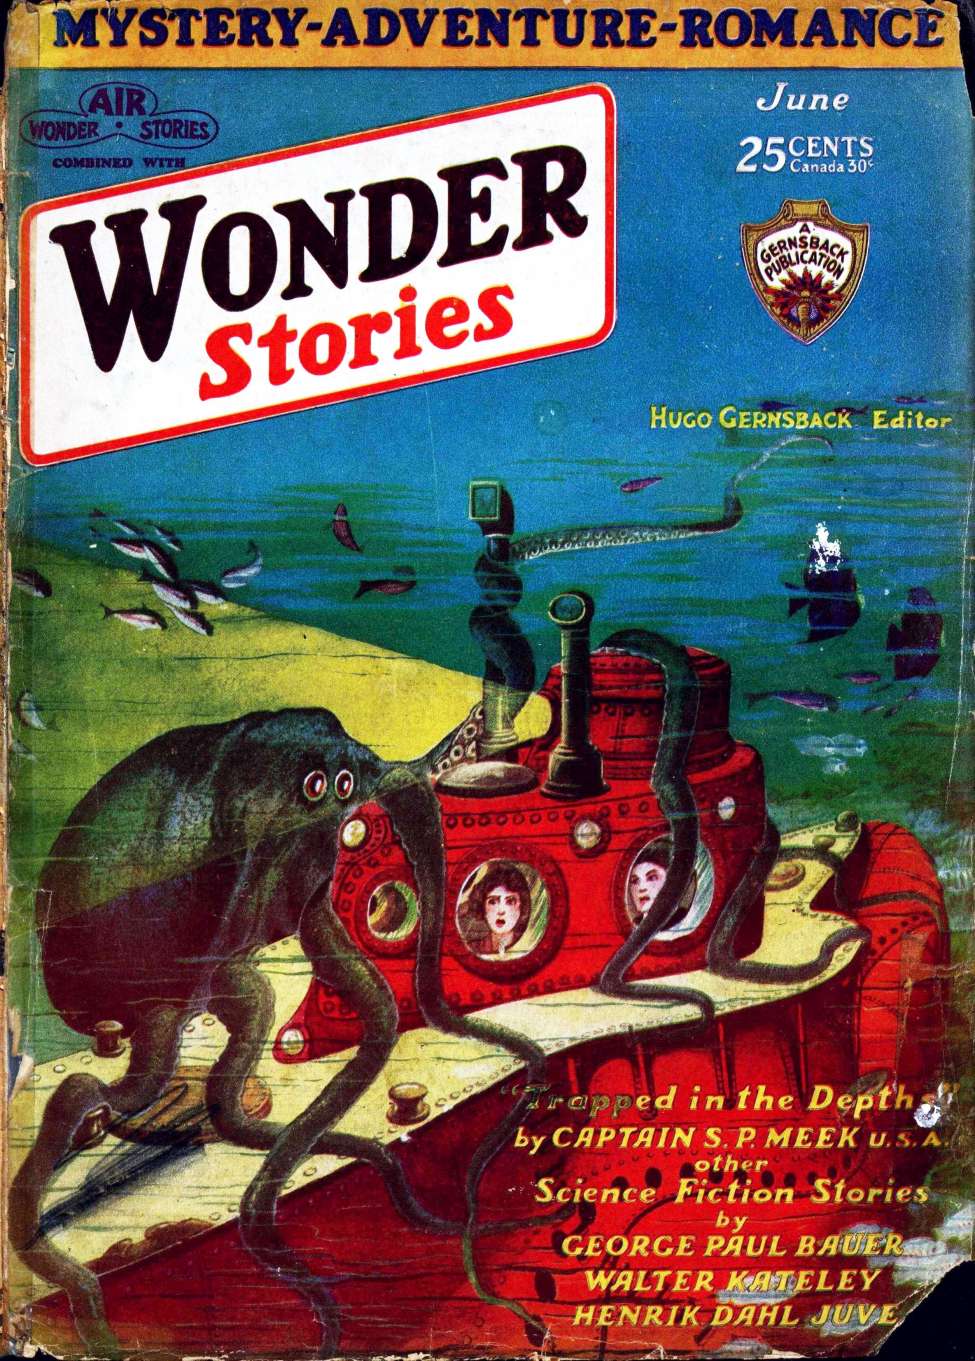 Comic Book Cover For Wonder Stories v2 1 - A Subterranean Adventure - George Paul Bauer